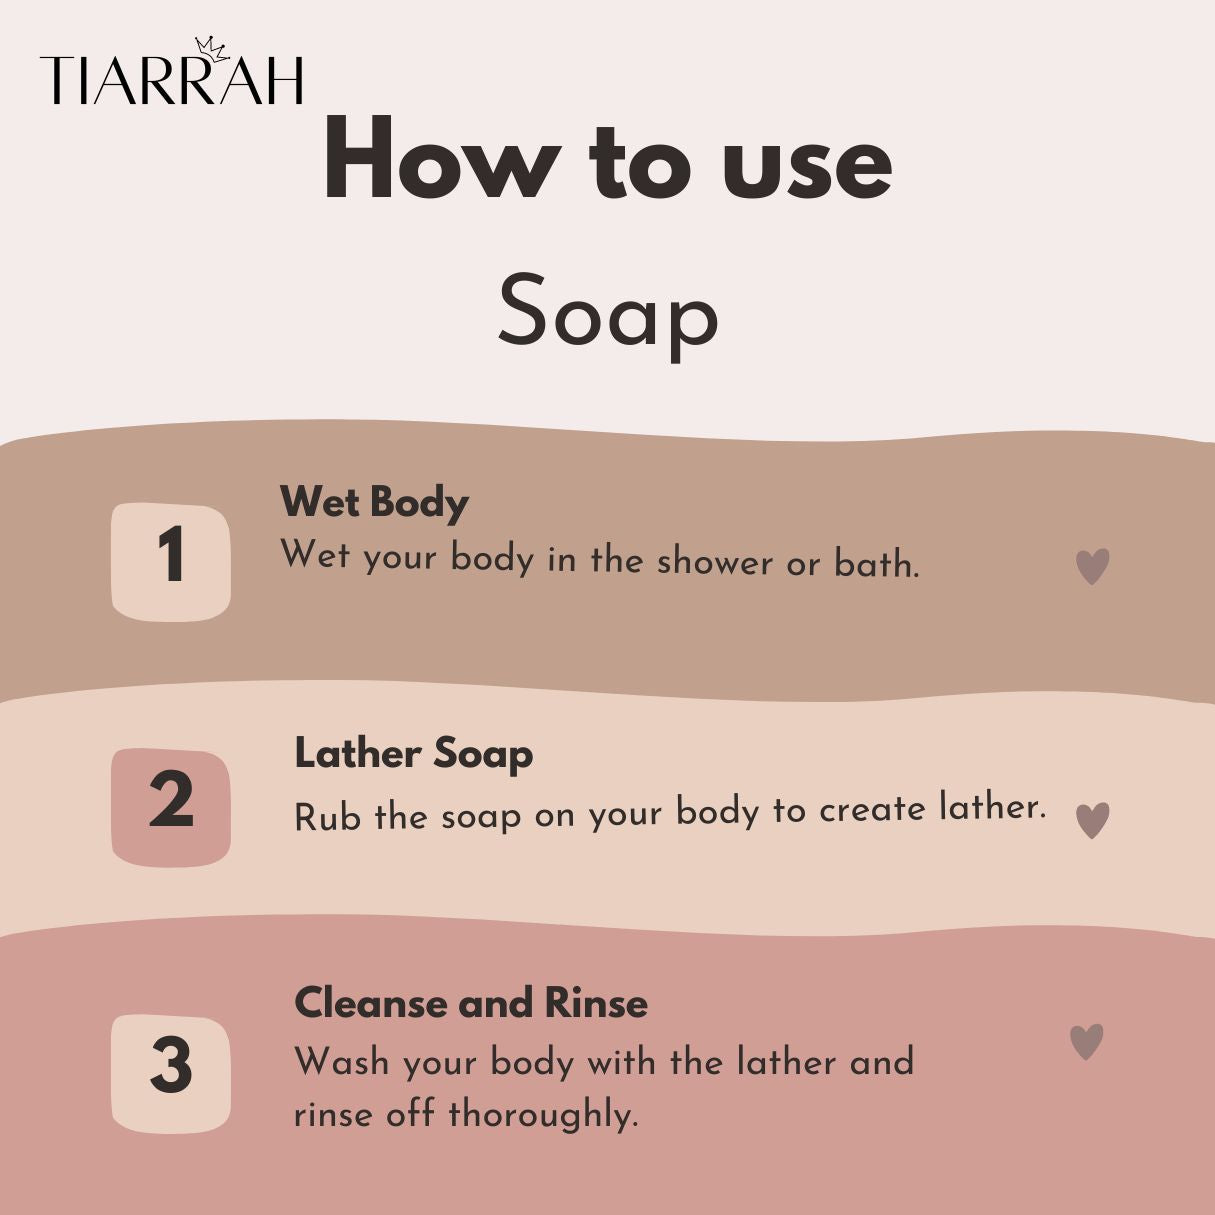 Tiarrah's Charcoal and Orange Soap: Natural & Non-Toxic - The Luxury Bath and Body Care Shop